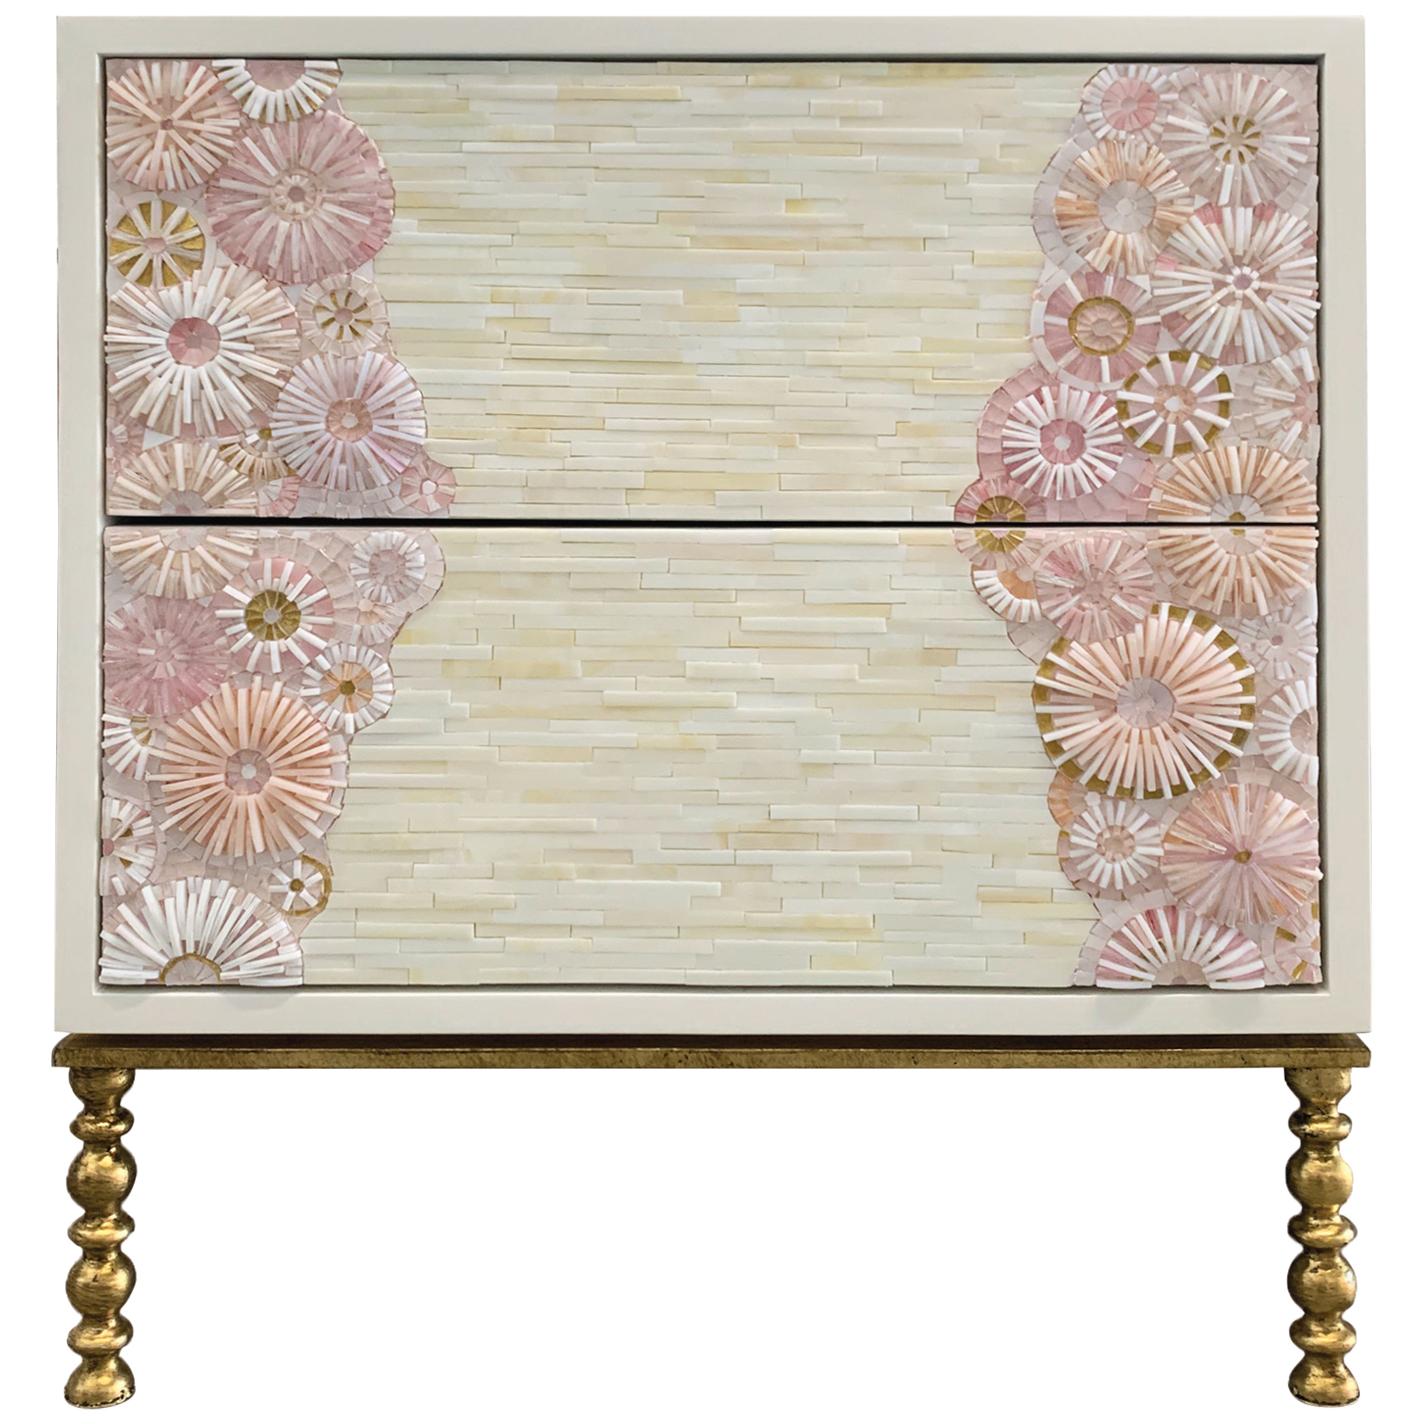 Customizable Blossom Glass Mosaic Nightstand, Vintage Metal Base by Ercole Home